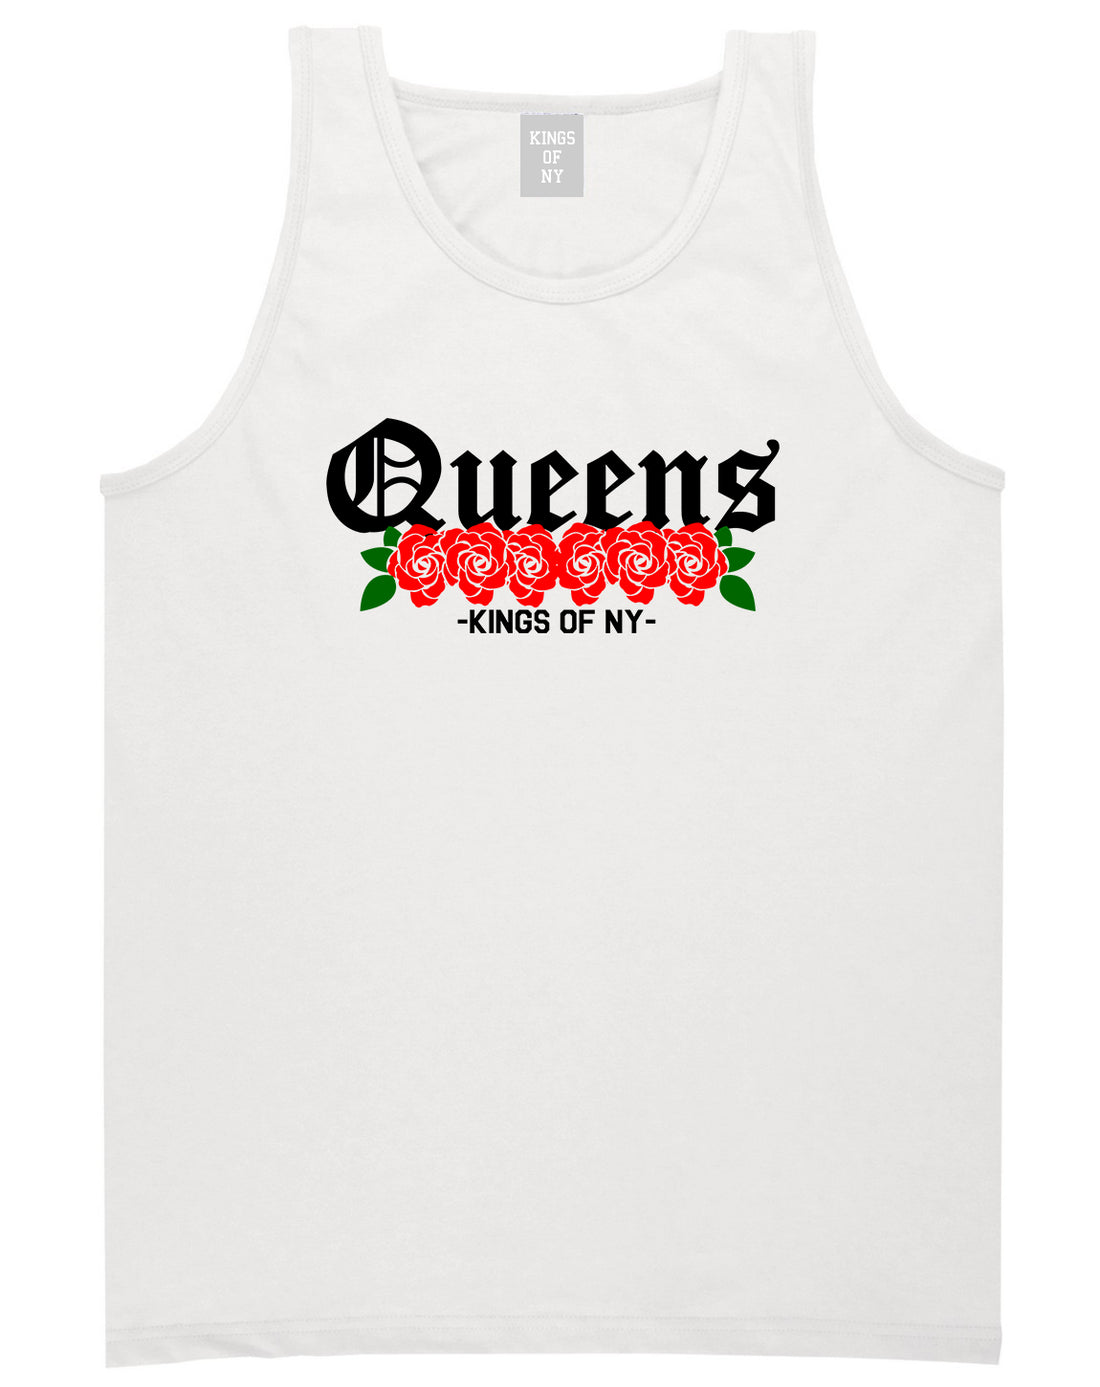 Queens Roses Kings Of NY Mens Tank Top T-Shirt White